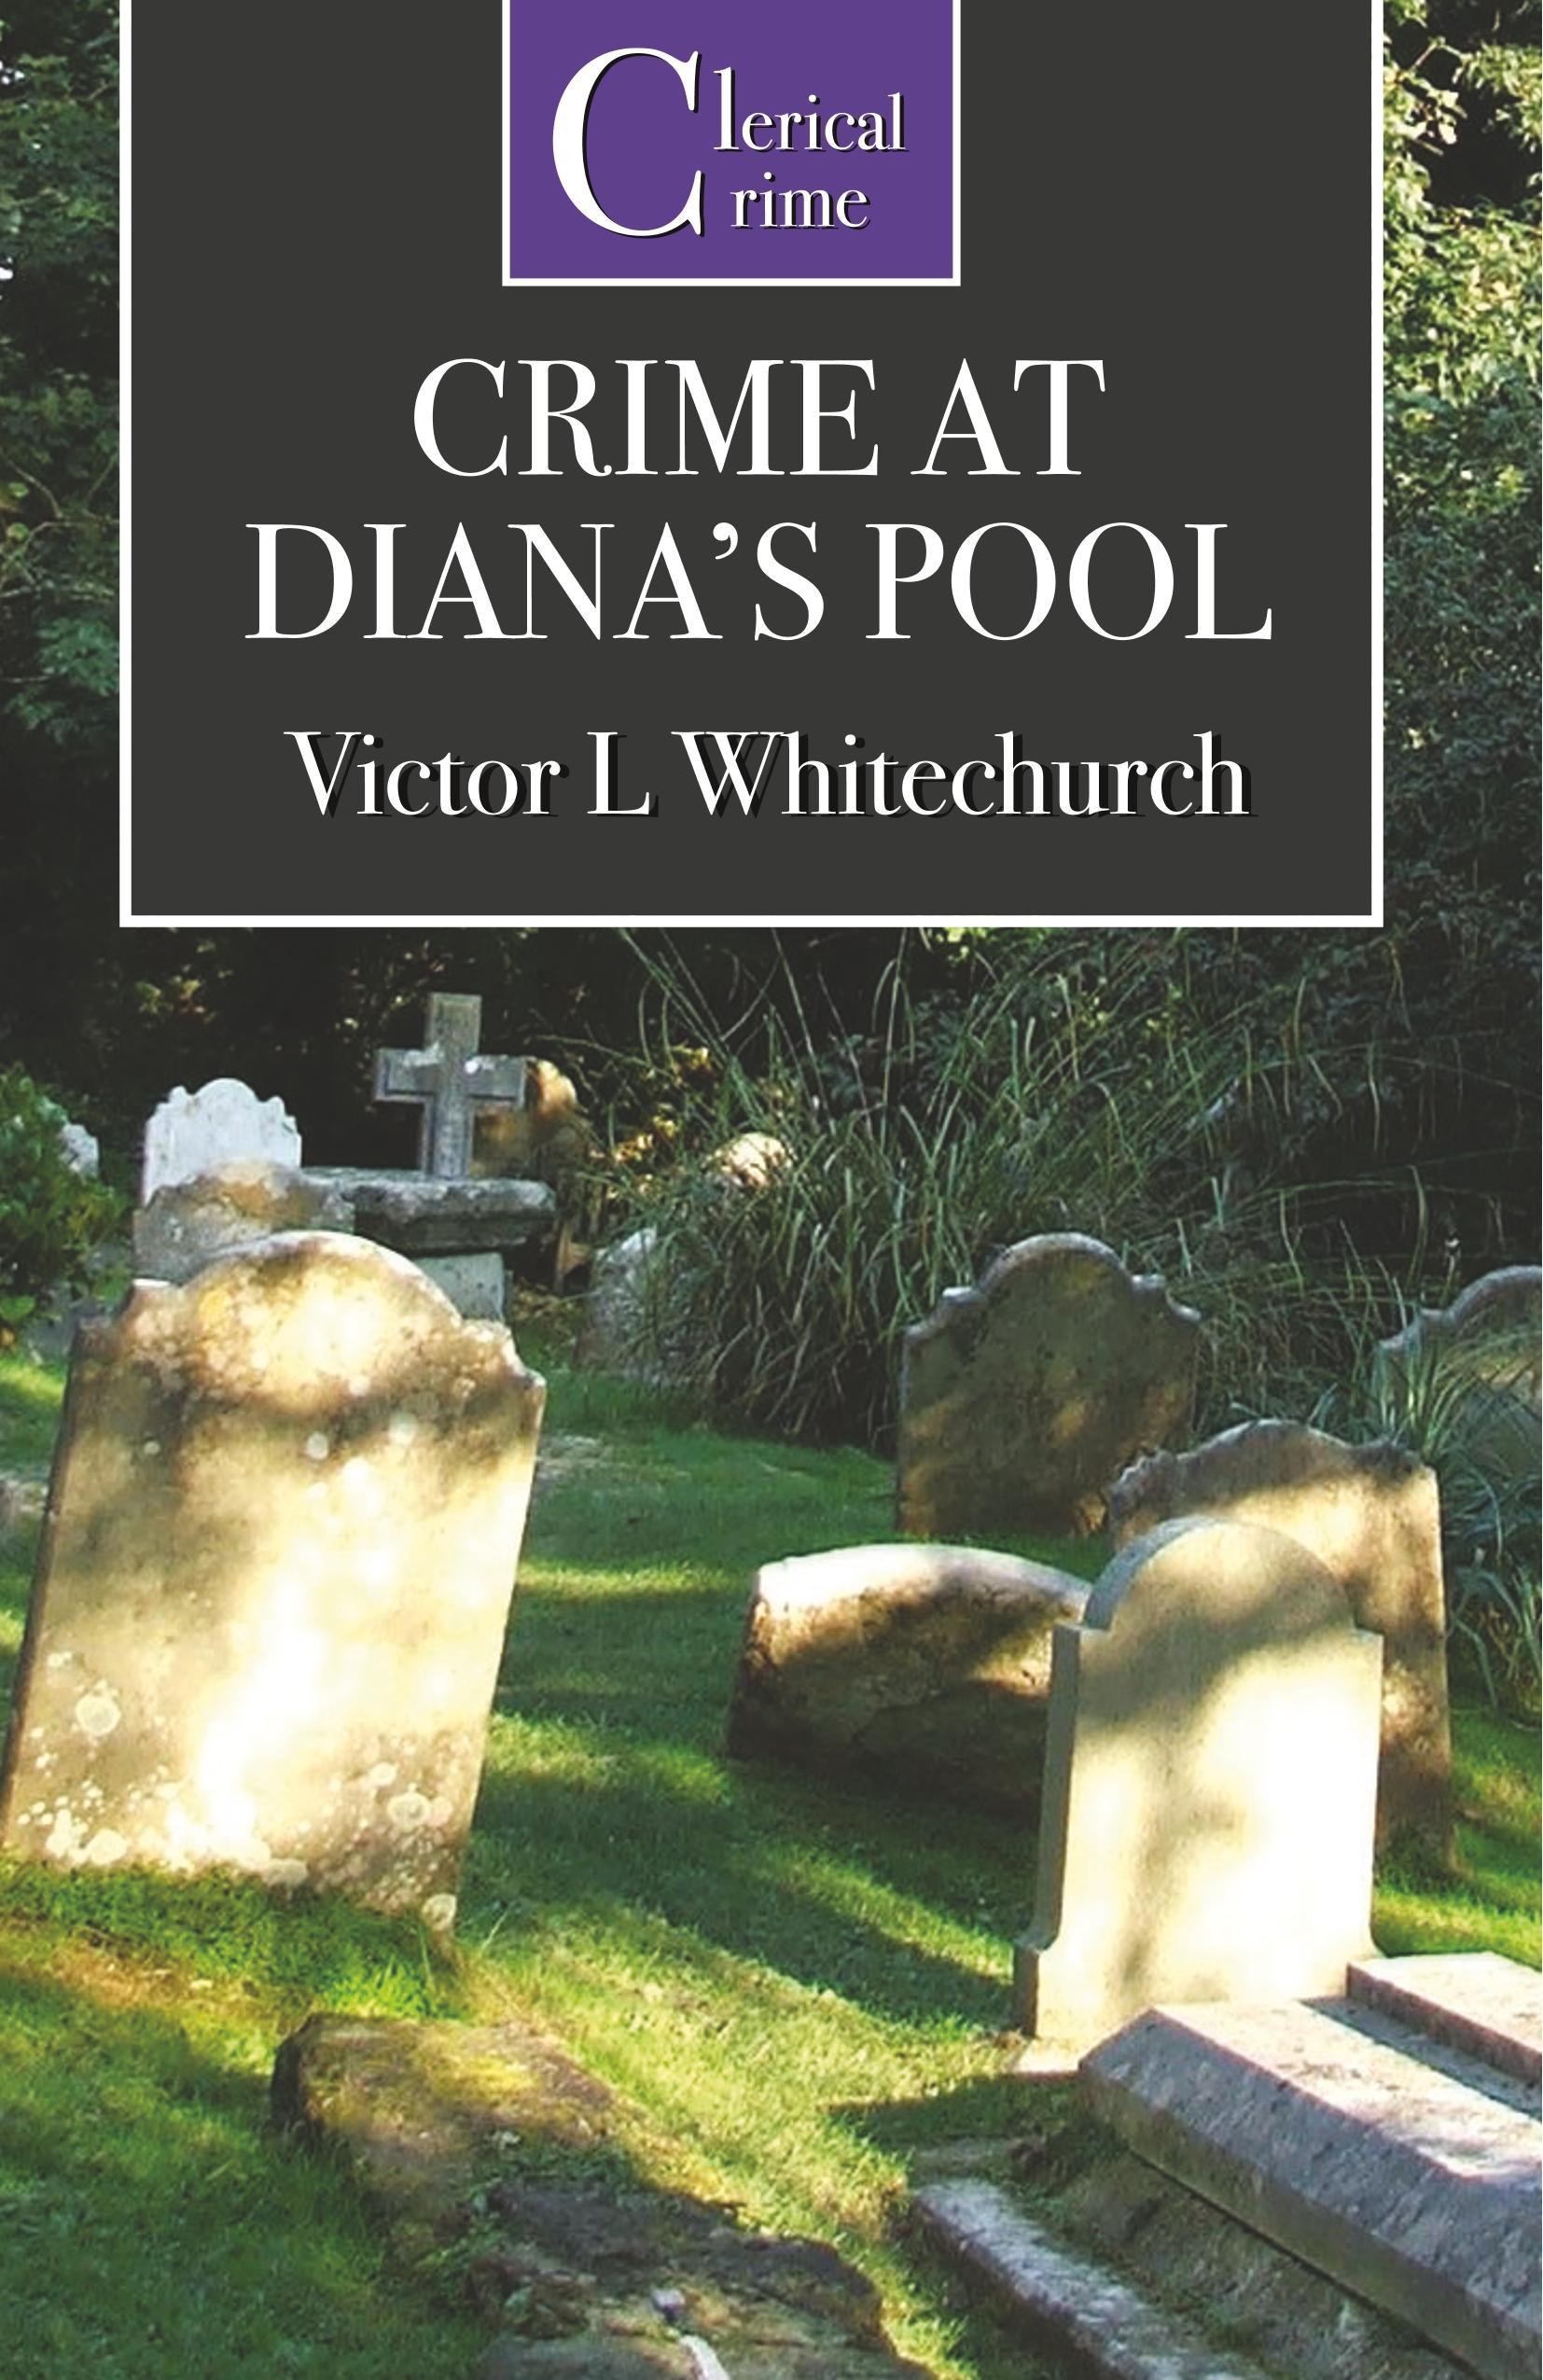 The Crime at Diana s Pool - Whitechurch, Victor L.